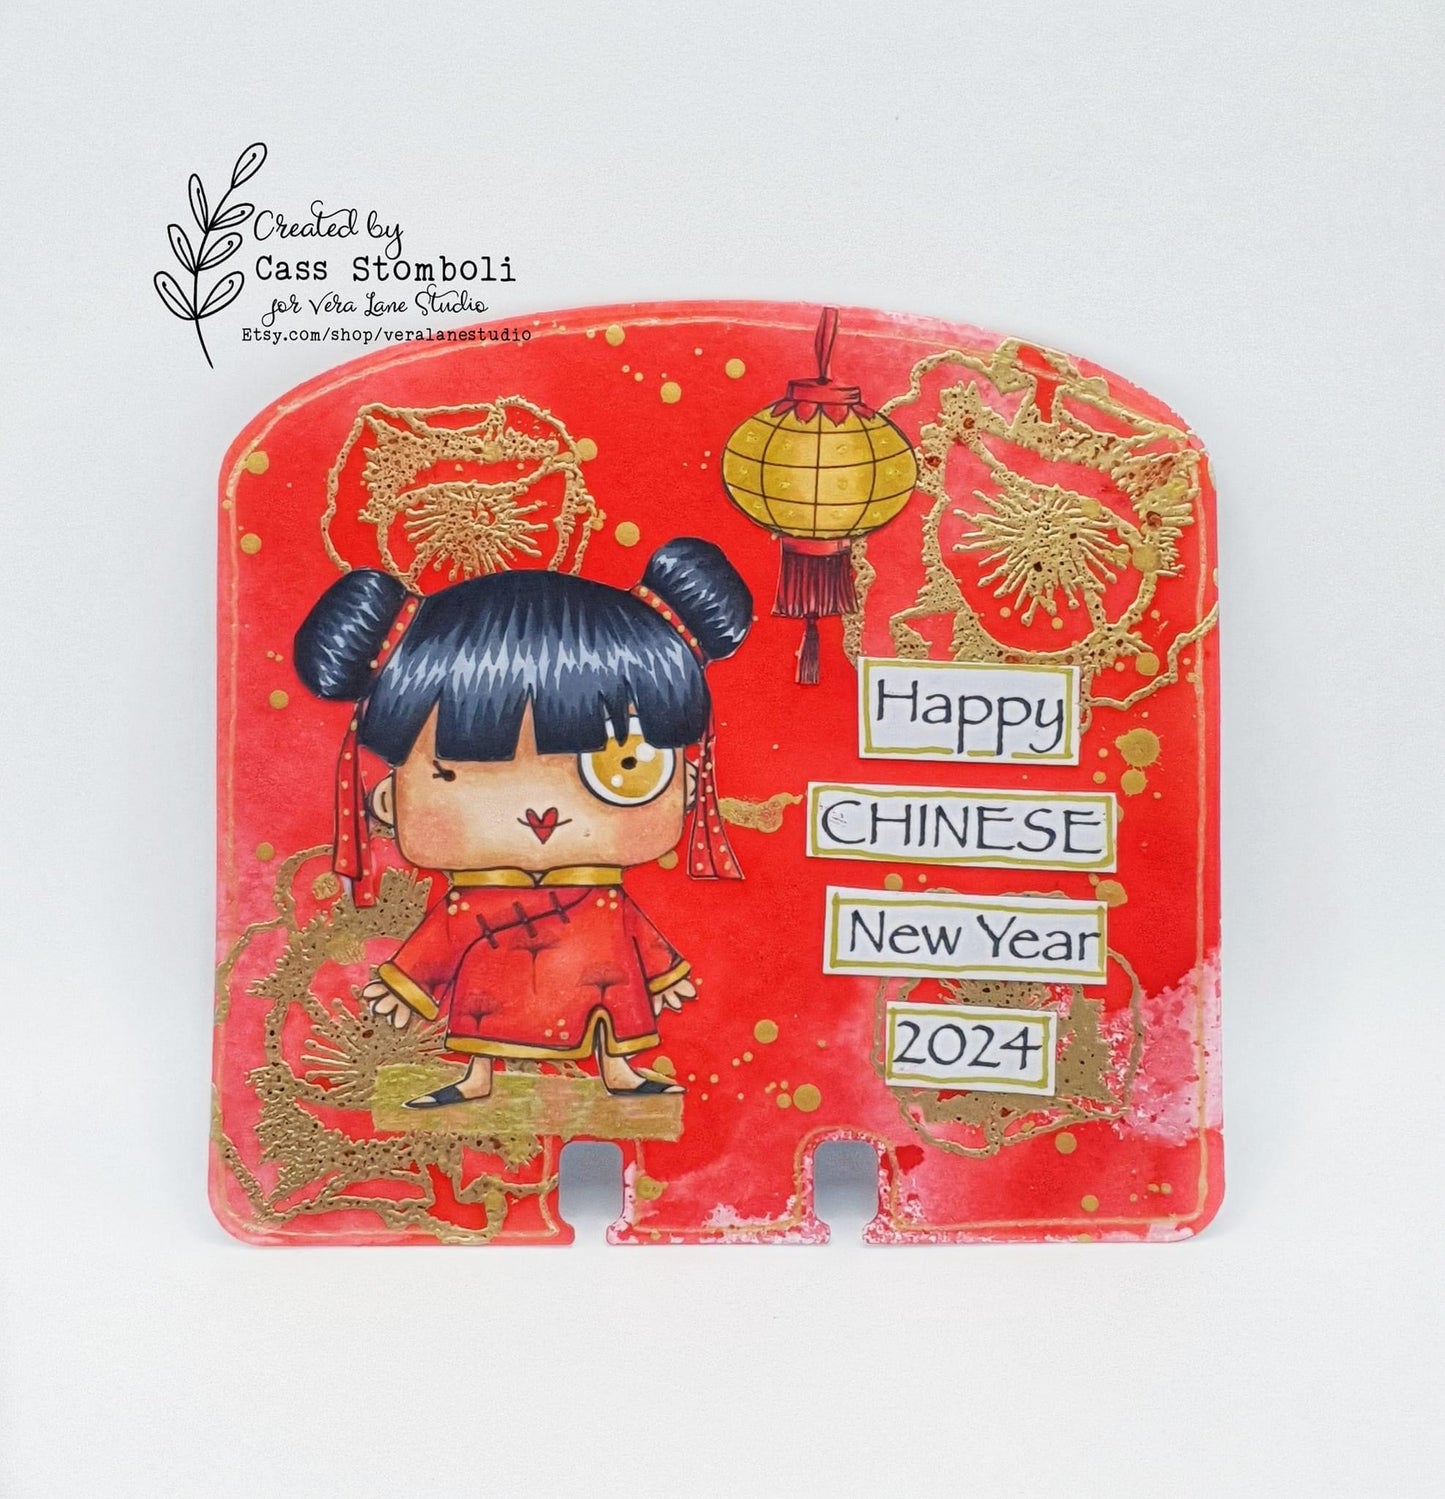 Chinese New Year - 7 Digi stamp set in jpg and png files